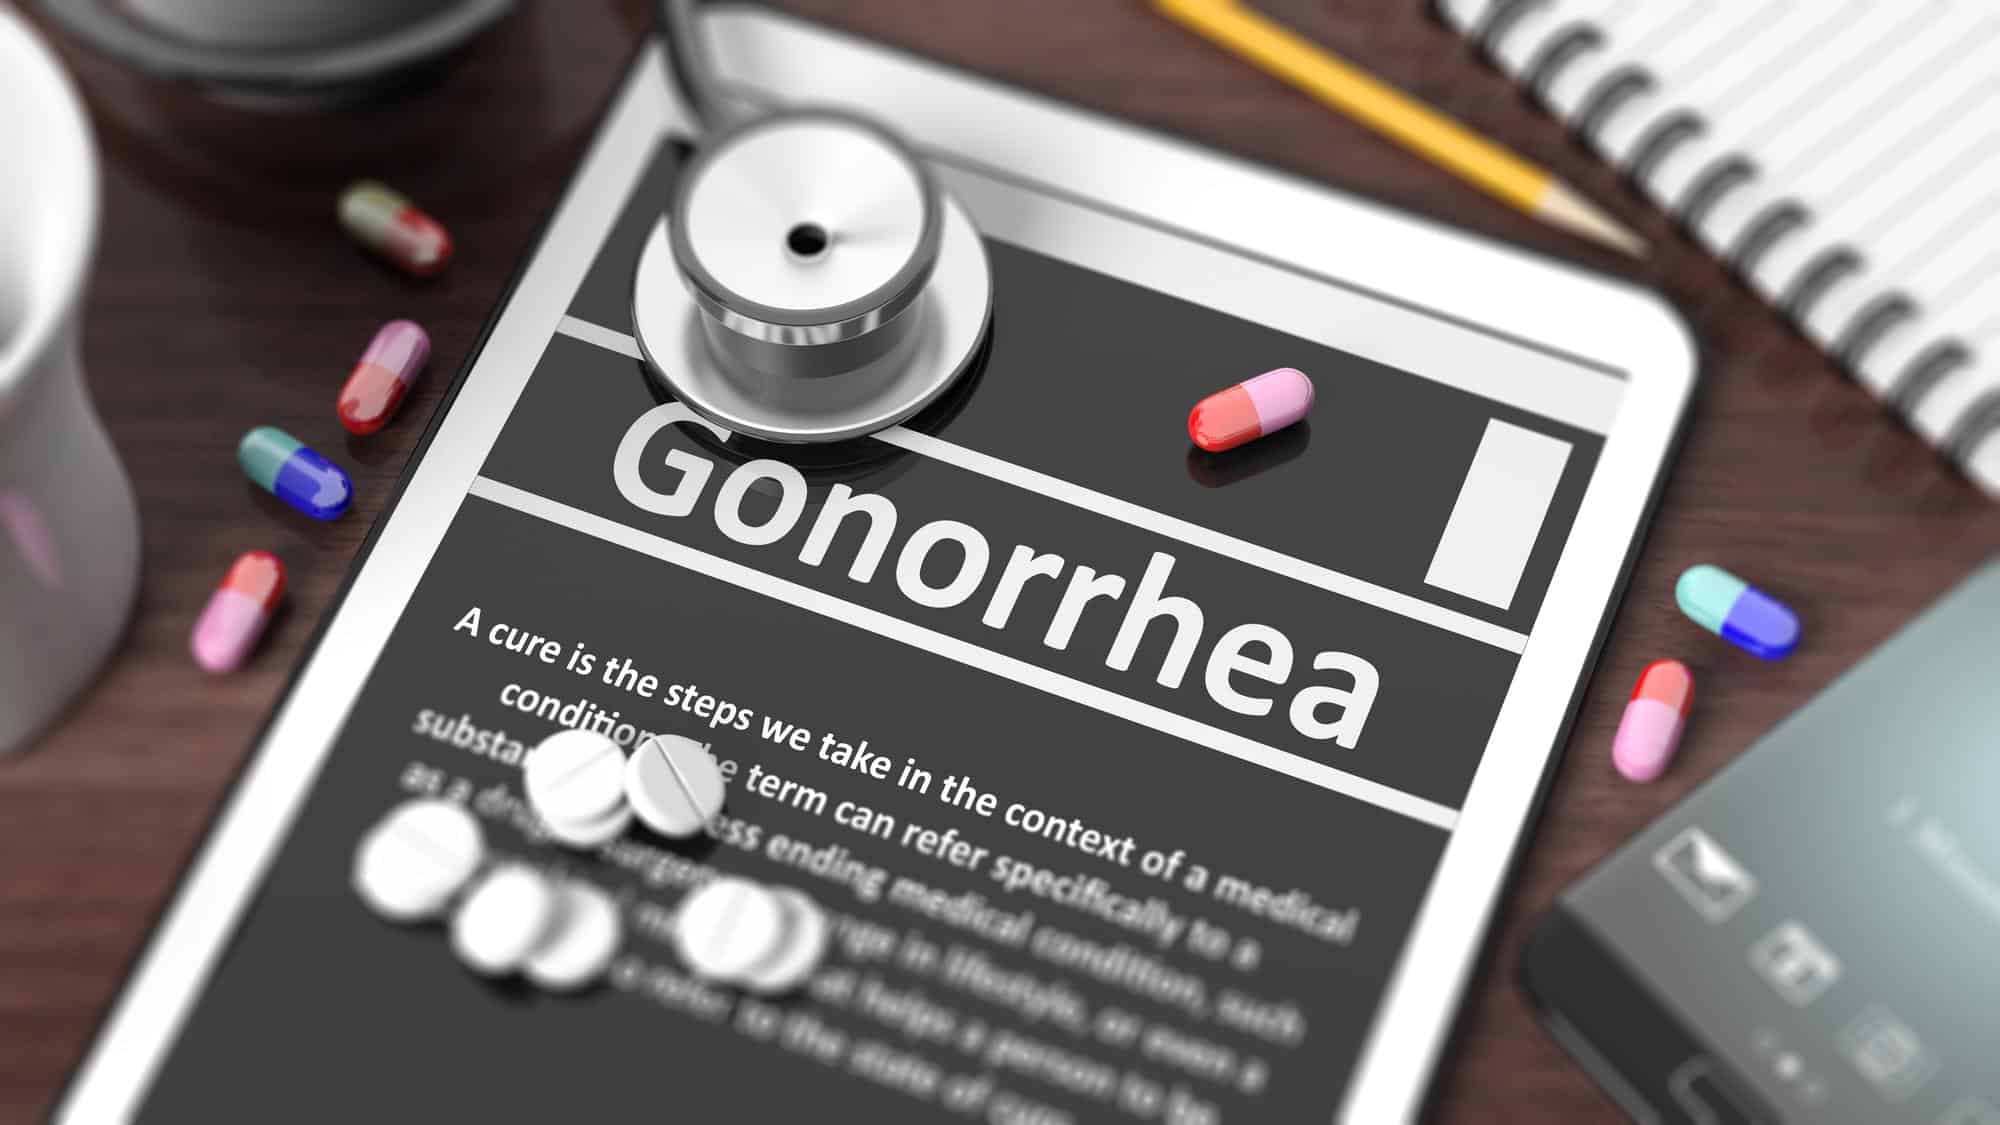 Gonorrhea: Causes, Symptoms and Treatment